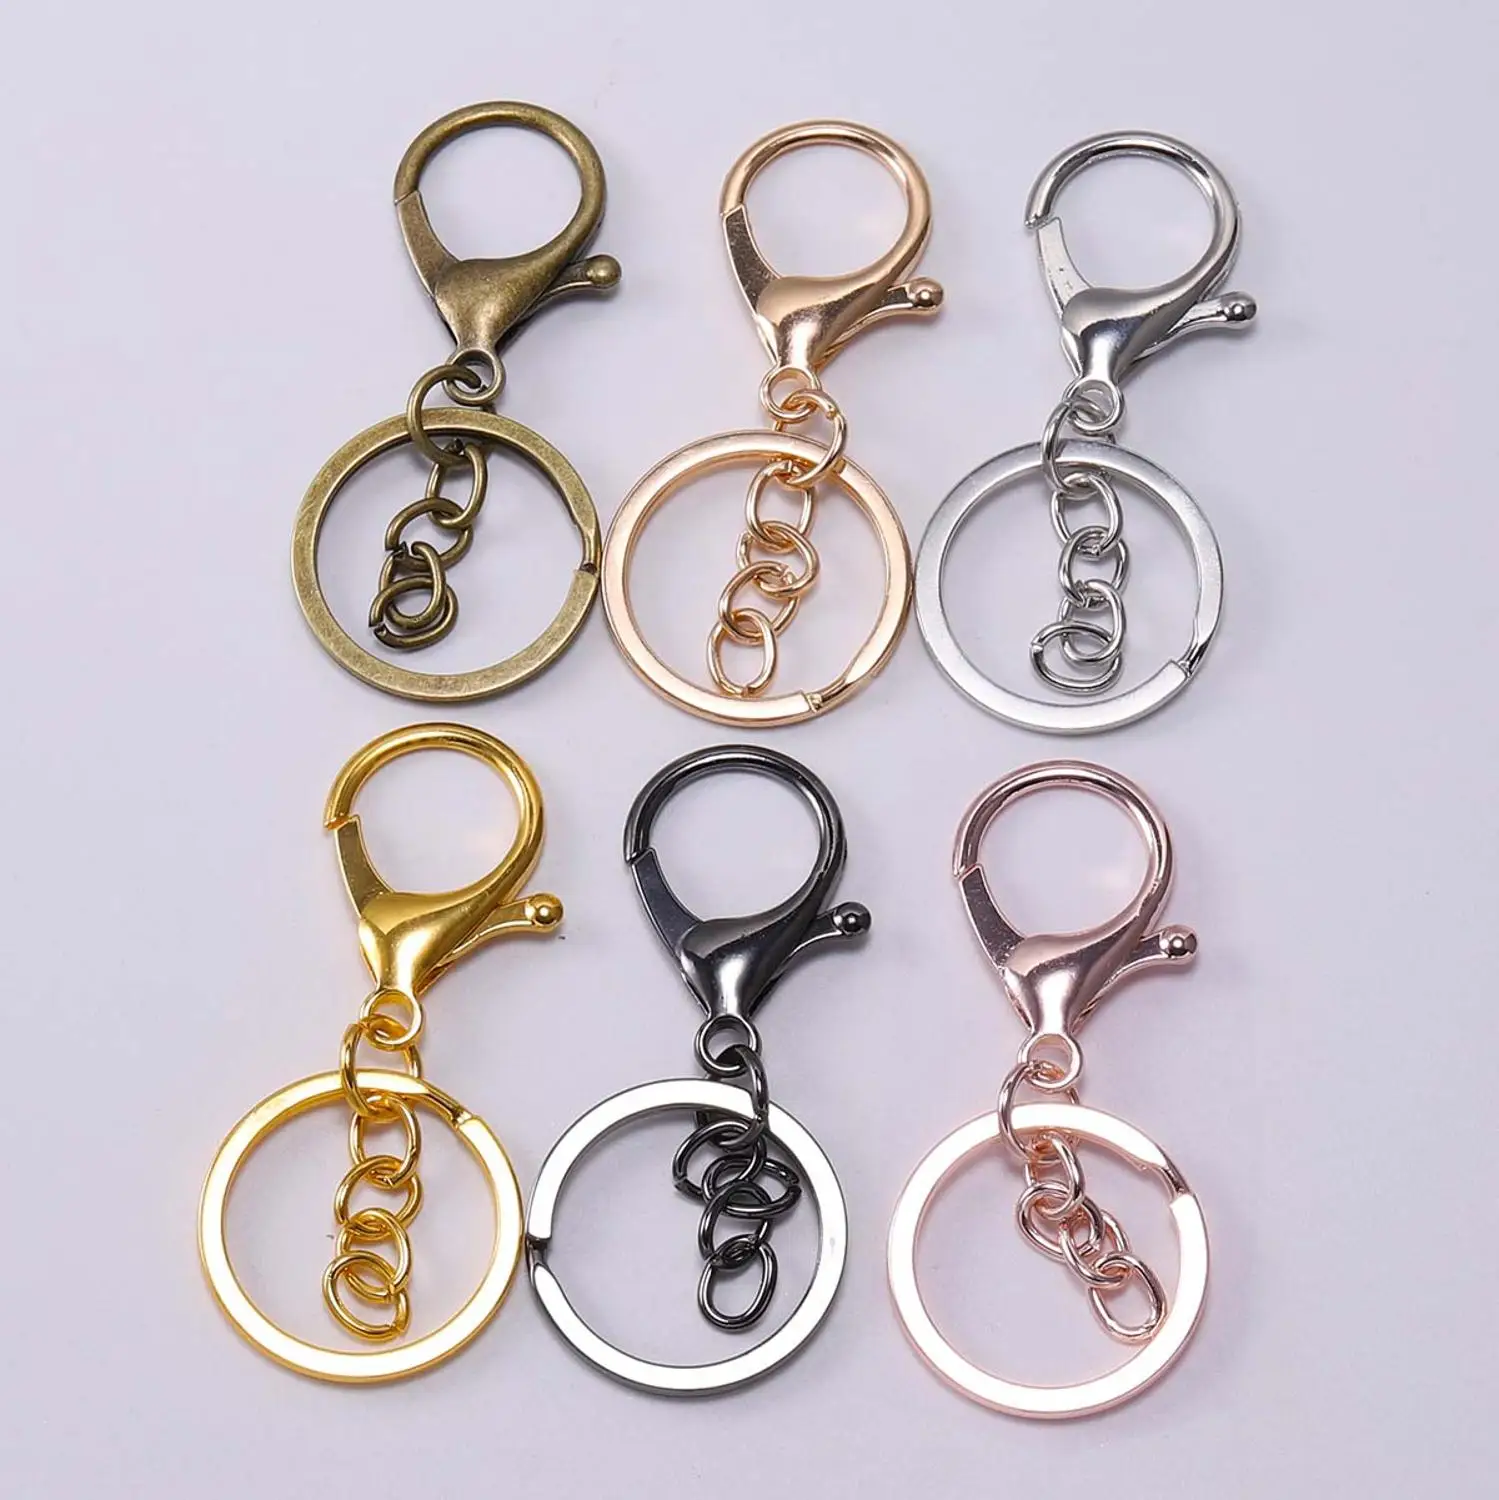 10 Pcs Keychain Hooks with Key Rings, Keychain Clip Hooks With Rings for  Lanyard Jewelry Making DIY Crafts(5 Pcs Metal Lobster Claw Clasps + 5 Pcs  Split Key Rings)